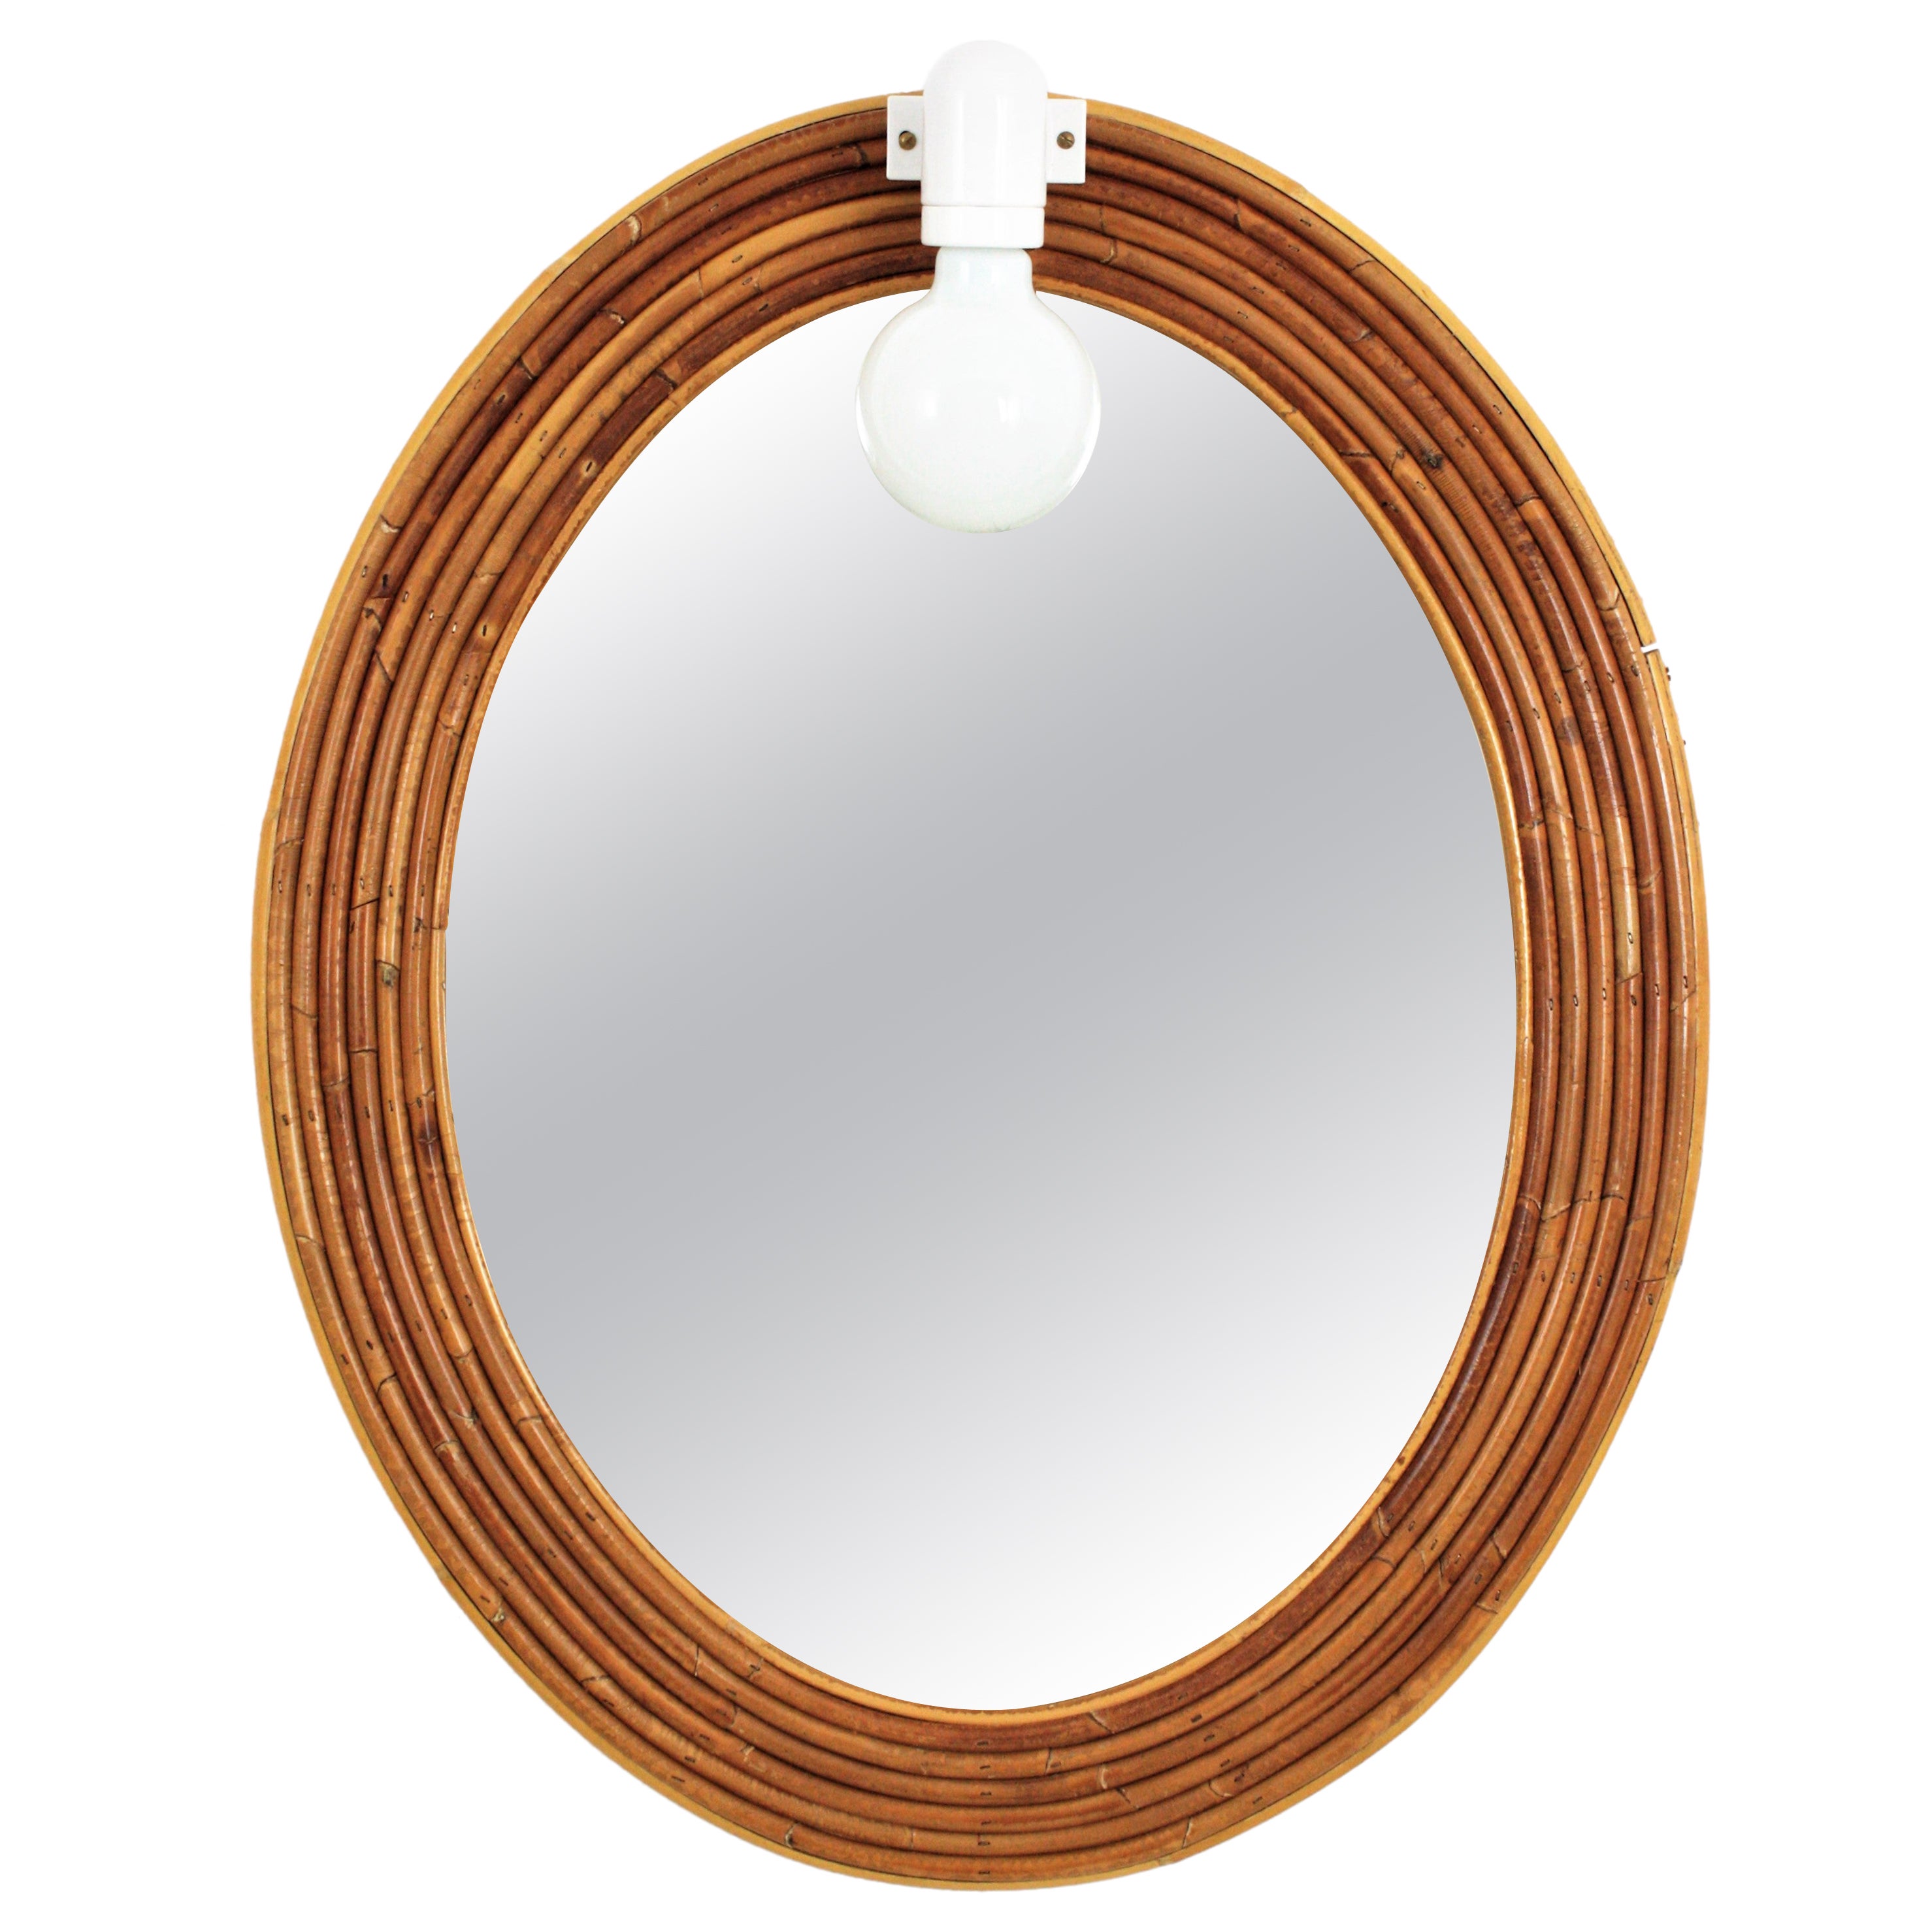 Vivai del Sud Rattan Oval Mirror with Wall Light For Sale